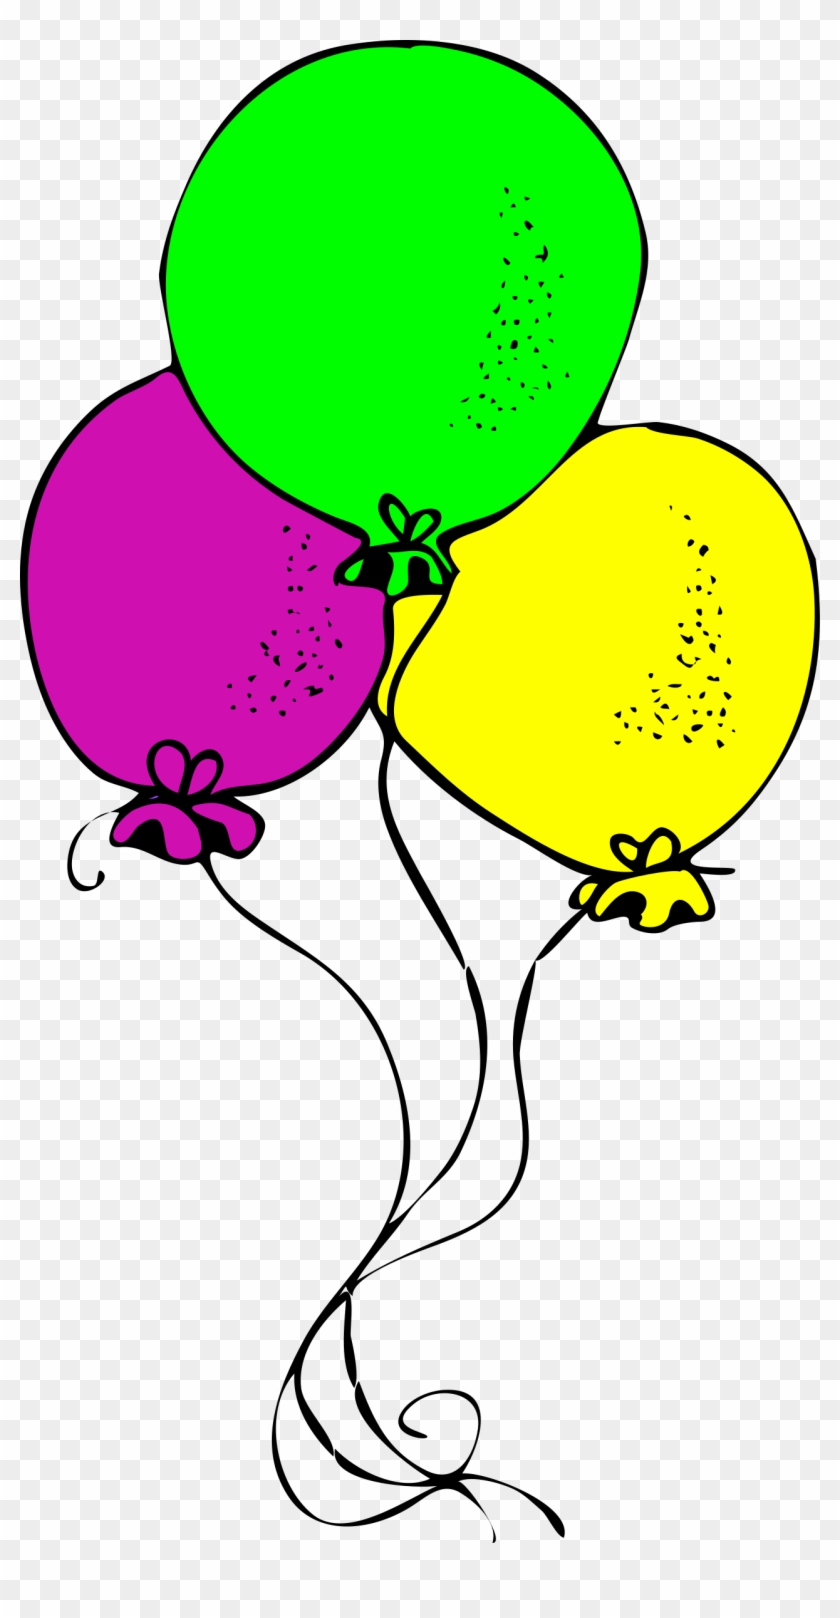 Big Image - Balloon Clipart Black And White #246344